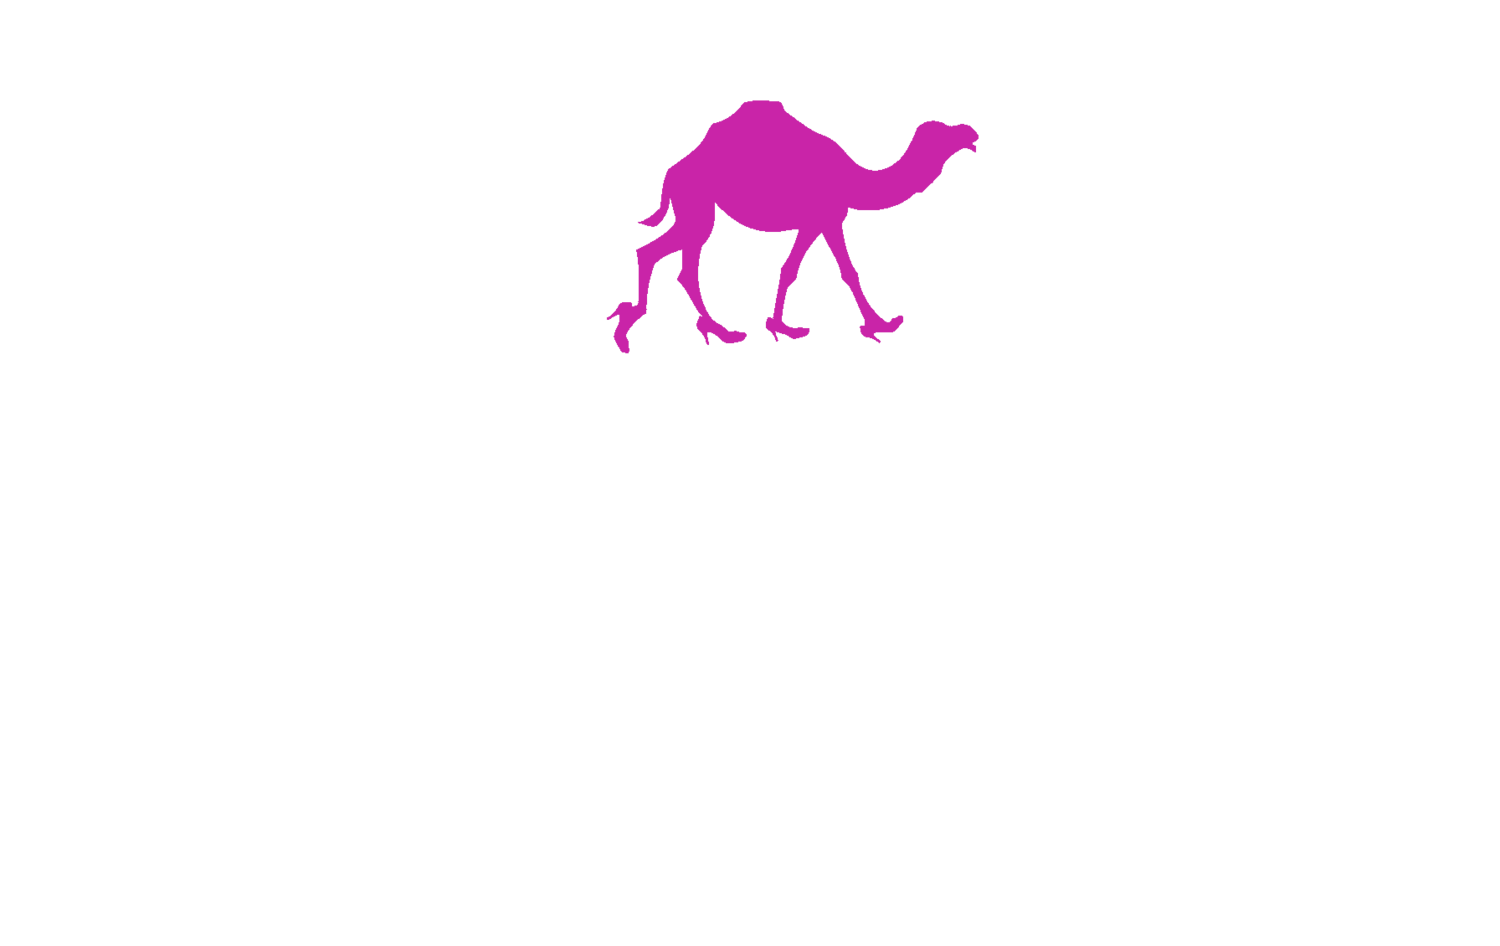 Youtube camel toes